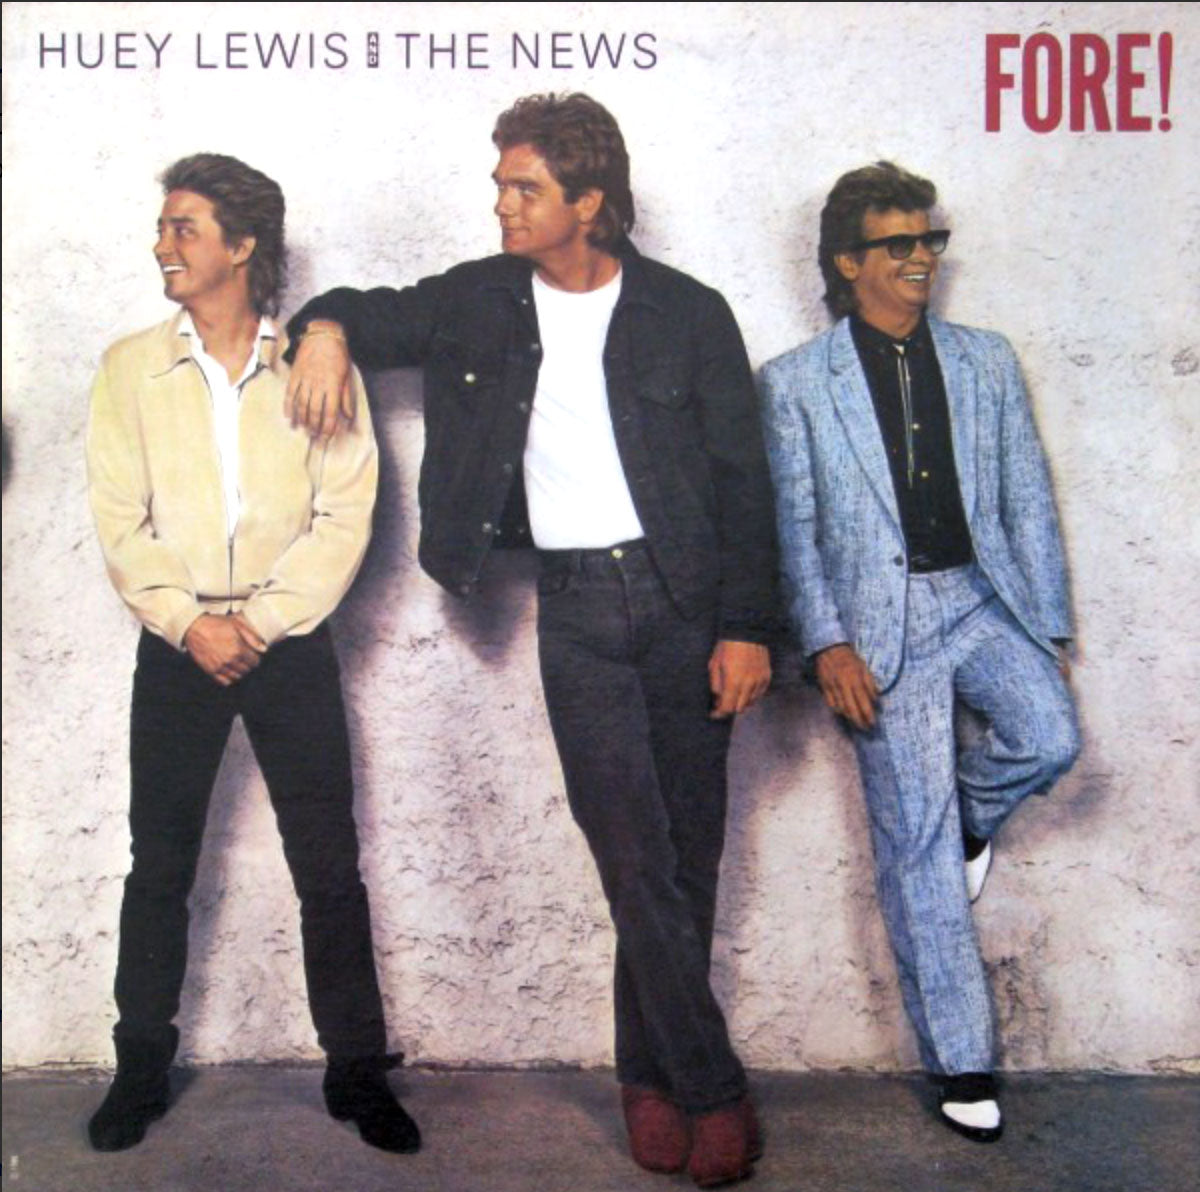 Huey Lewis And The News – Fore!